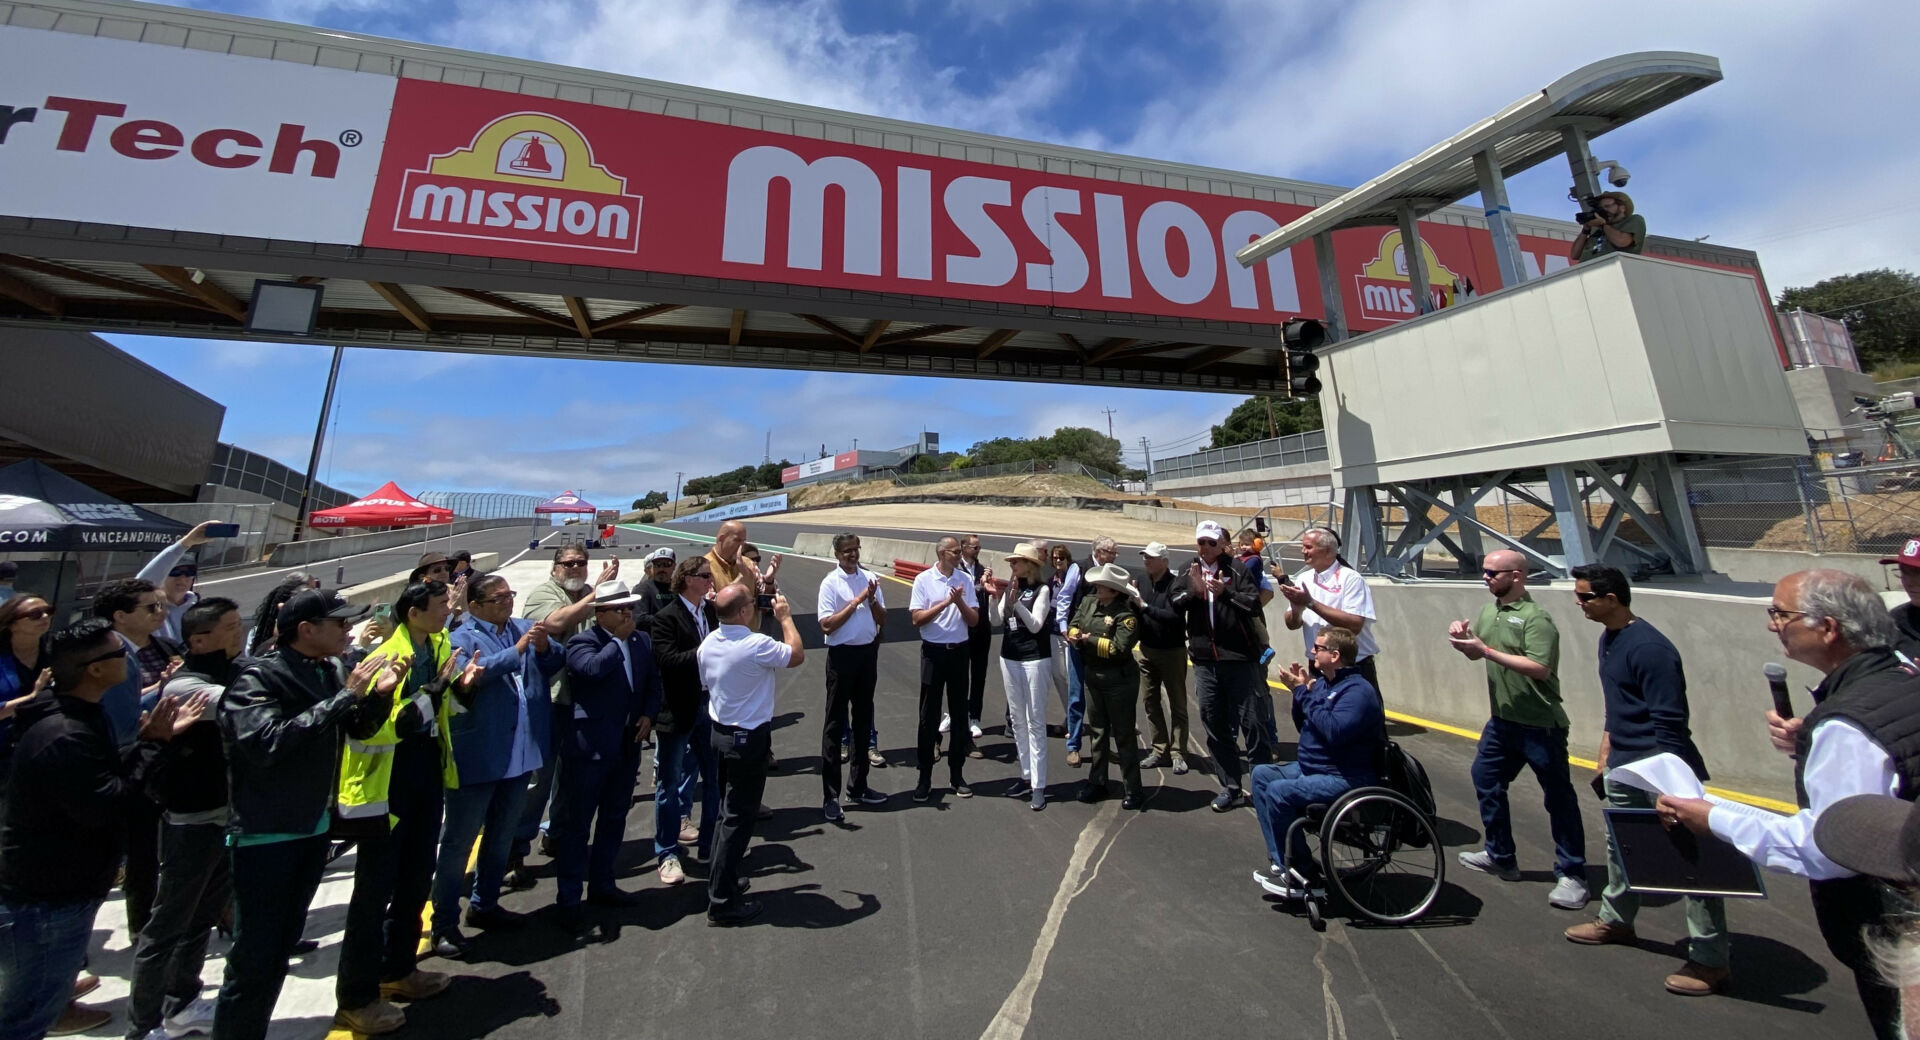 The opening ceremony of the new Mission Foods Bridge at WeatherTech Raceway Laguna Seca. Photo by Paul Carruthers, courtesy MotoAmerica.